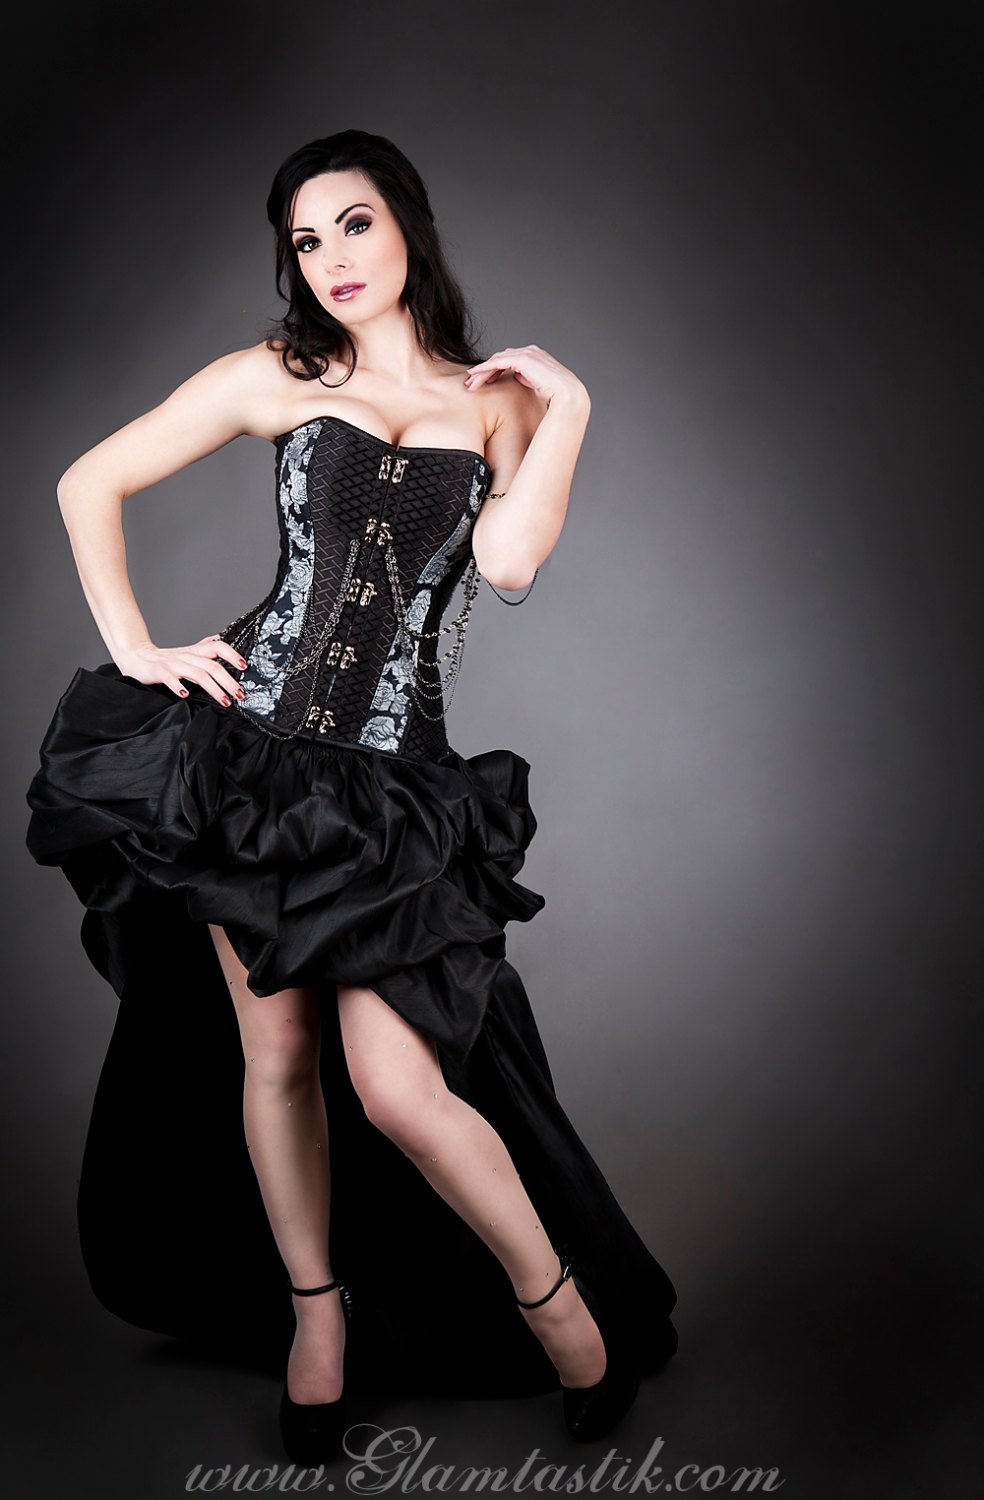 Black Steampunk Gothic Corset Burlesque High-Low Prom Party Dress 